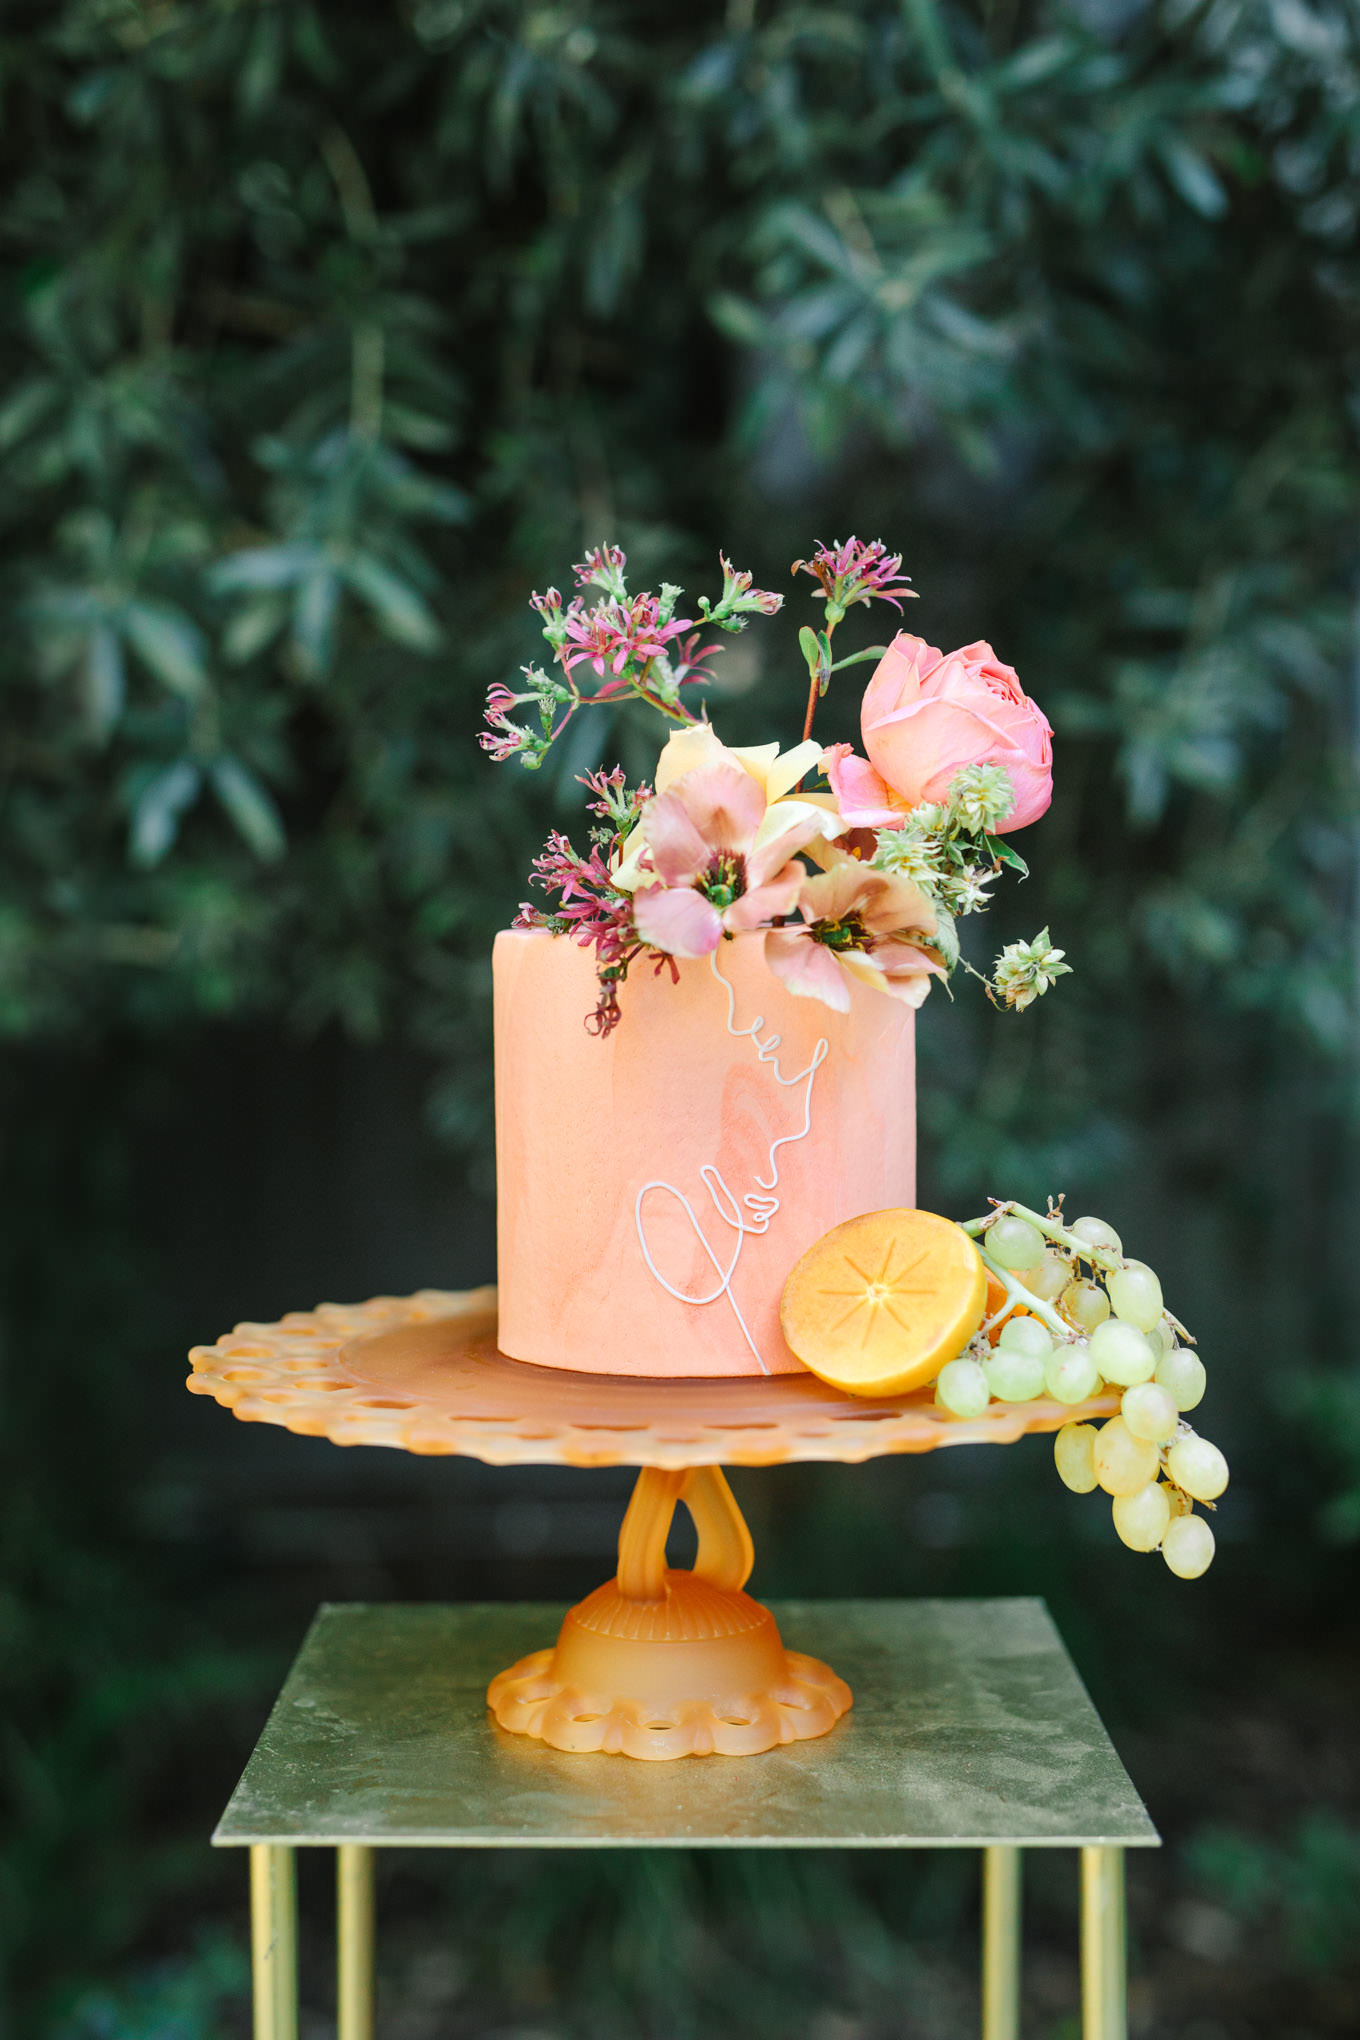 Creative blush wedding cake at Redbird elopement by Nicole Bakes Cakes | Engagement, elopement, and wedding photography roundup of Mary Costa’s favorite images from 2020 | Colorful and elevated photography for fun-loving couples in Southern California | #2020wedding #elopement #weddingphoto #weddingphotography #microwedding   Source: Mary Costa Photography | Los Angeles